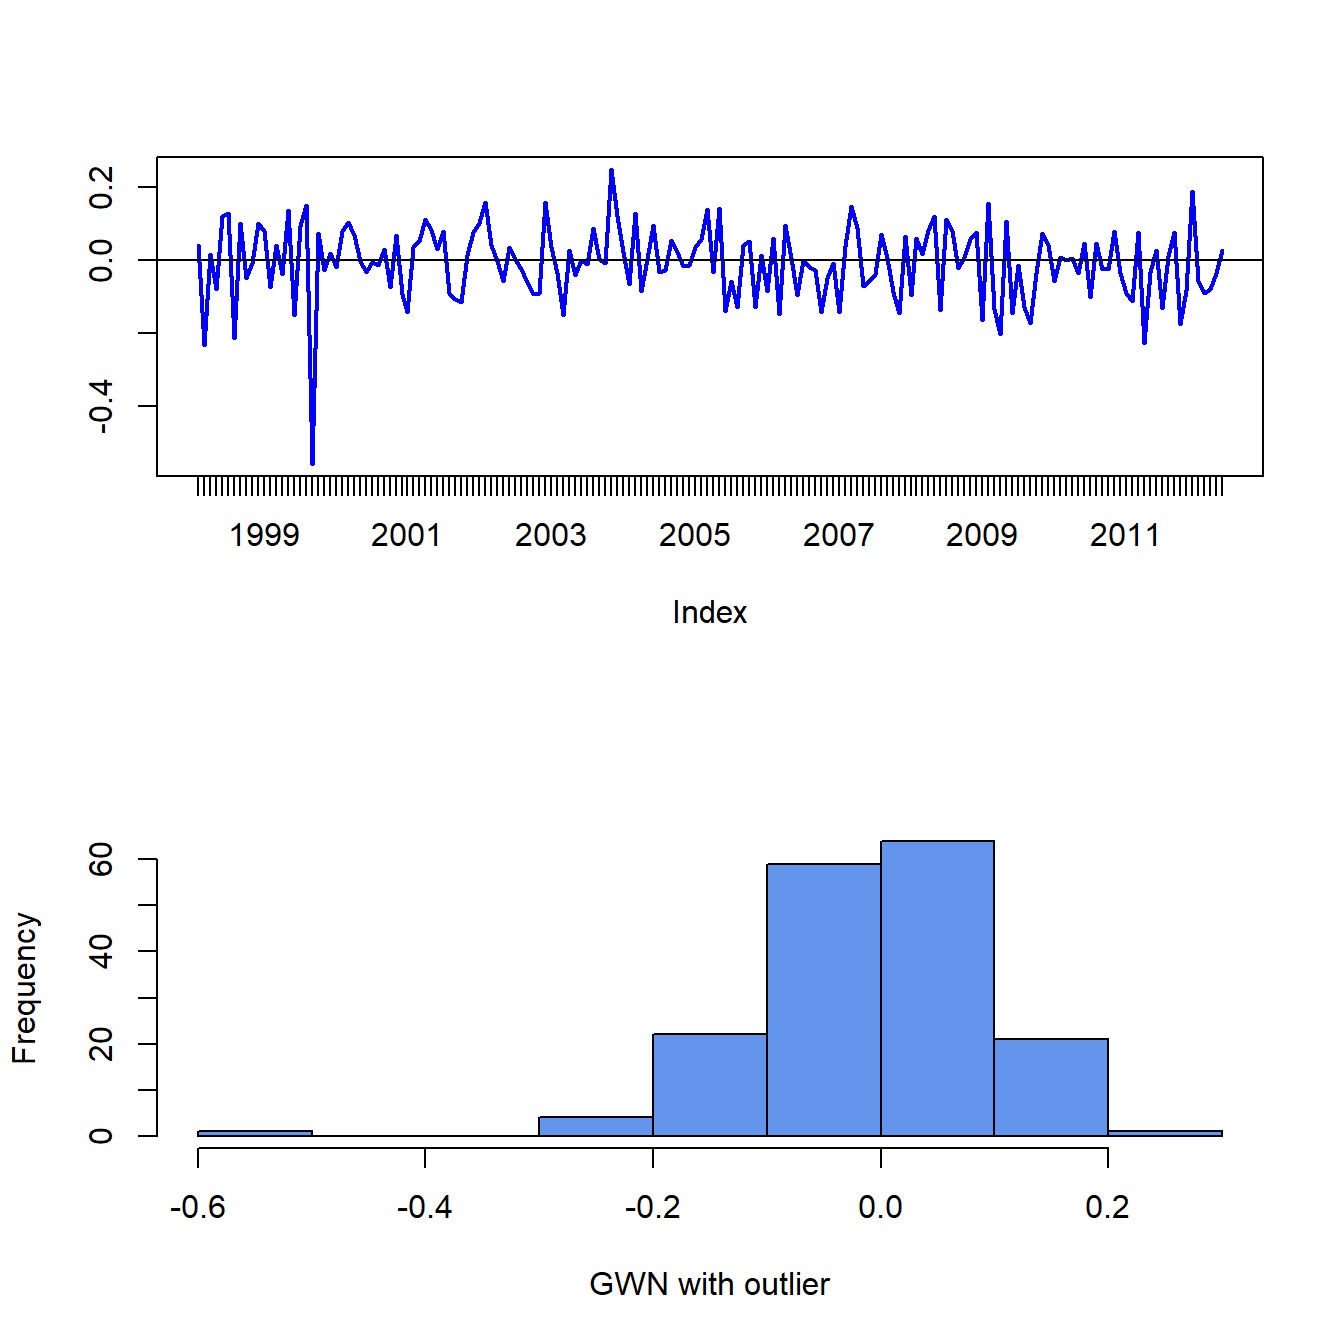 Monthly GWN data polluted by a single outlier.